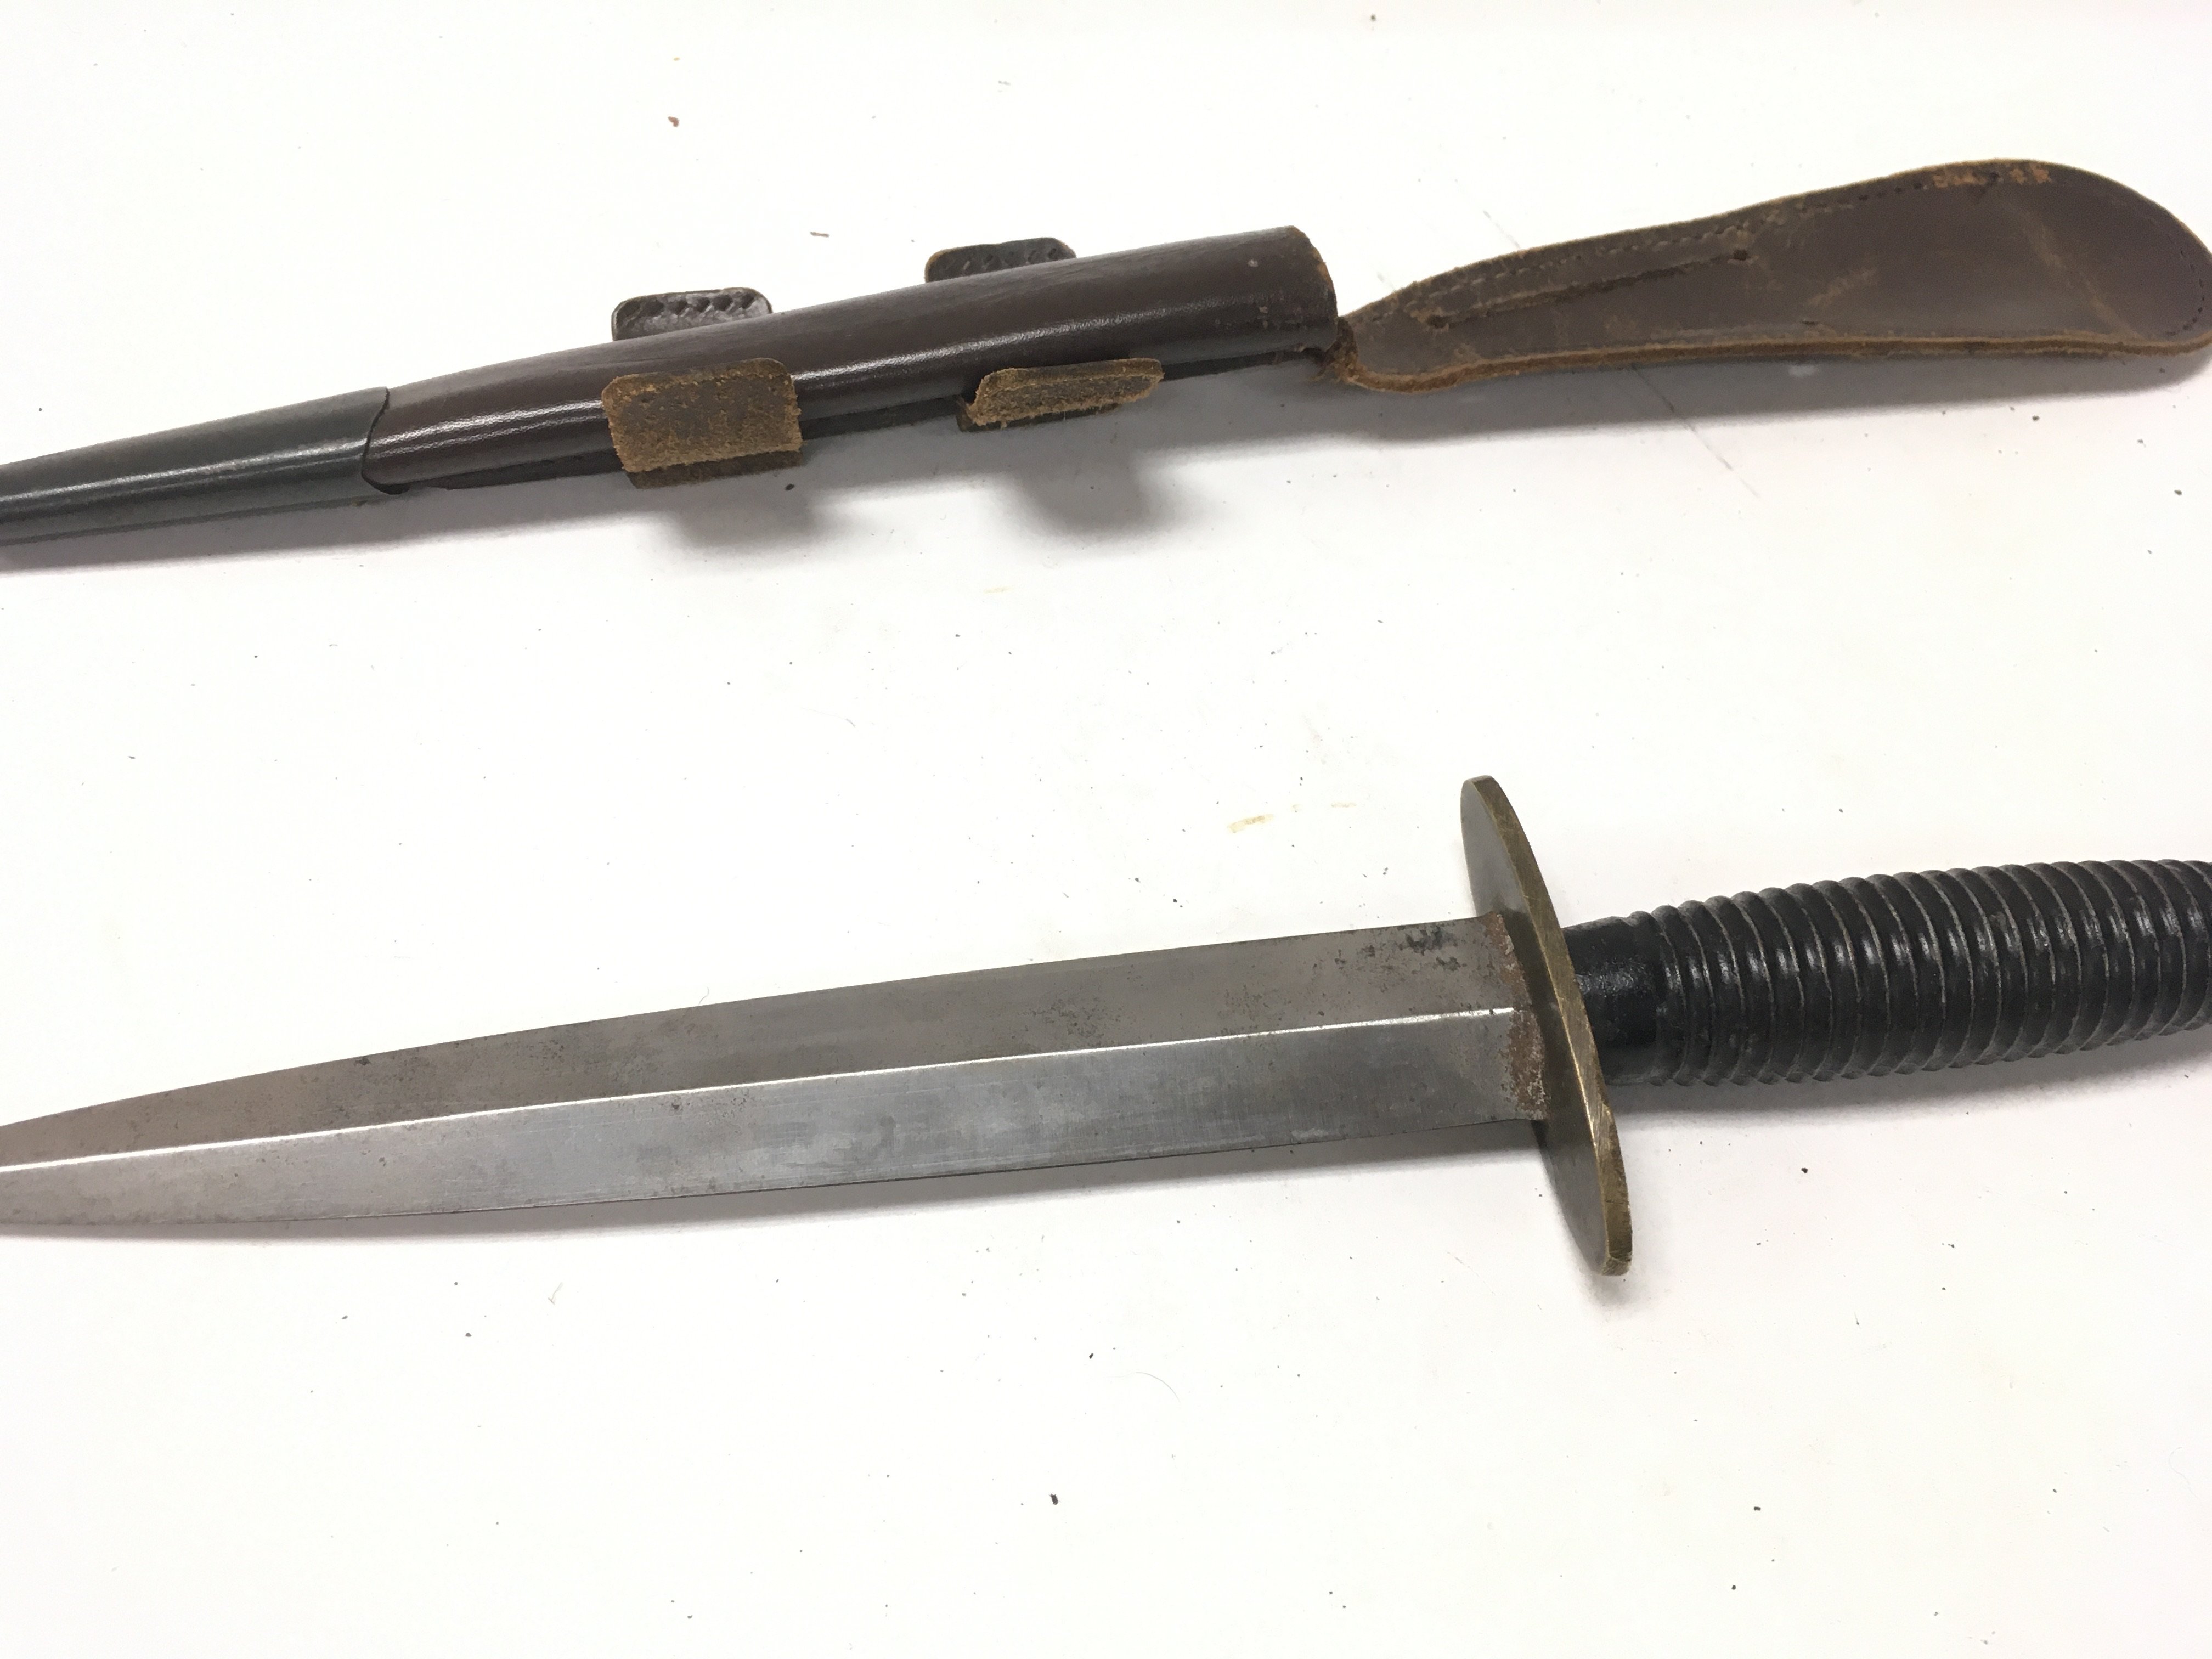 A Fairbairn Sykes fighting knife with leather scab - Image 4 of 5